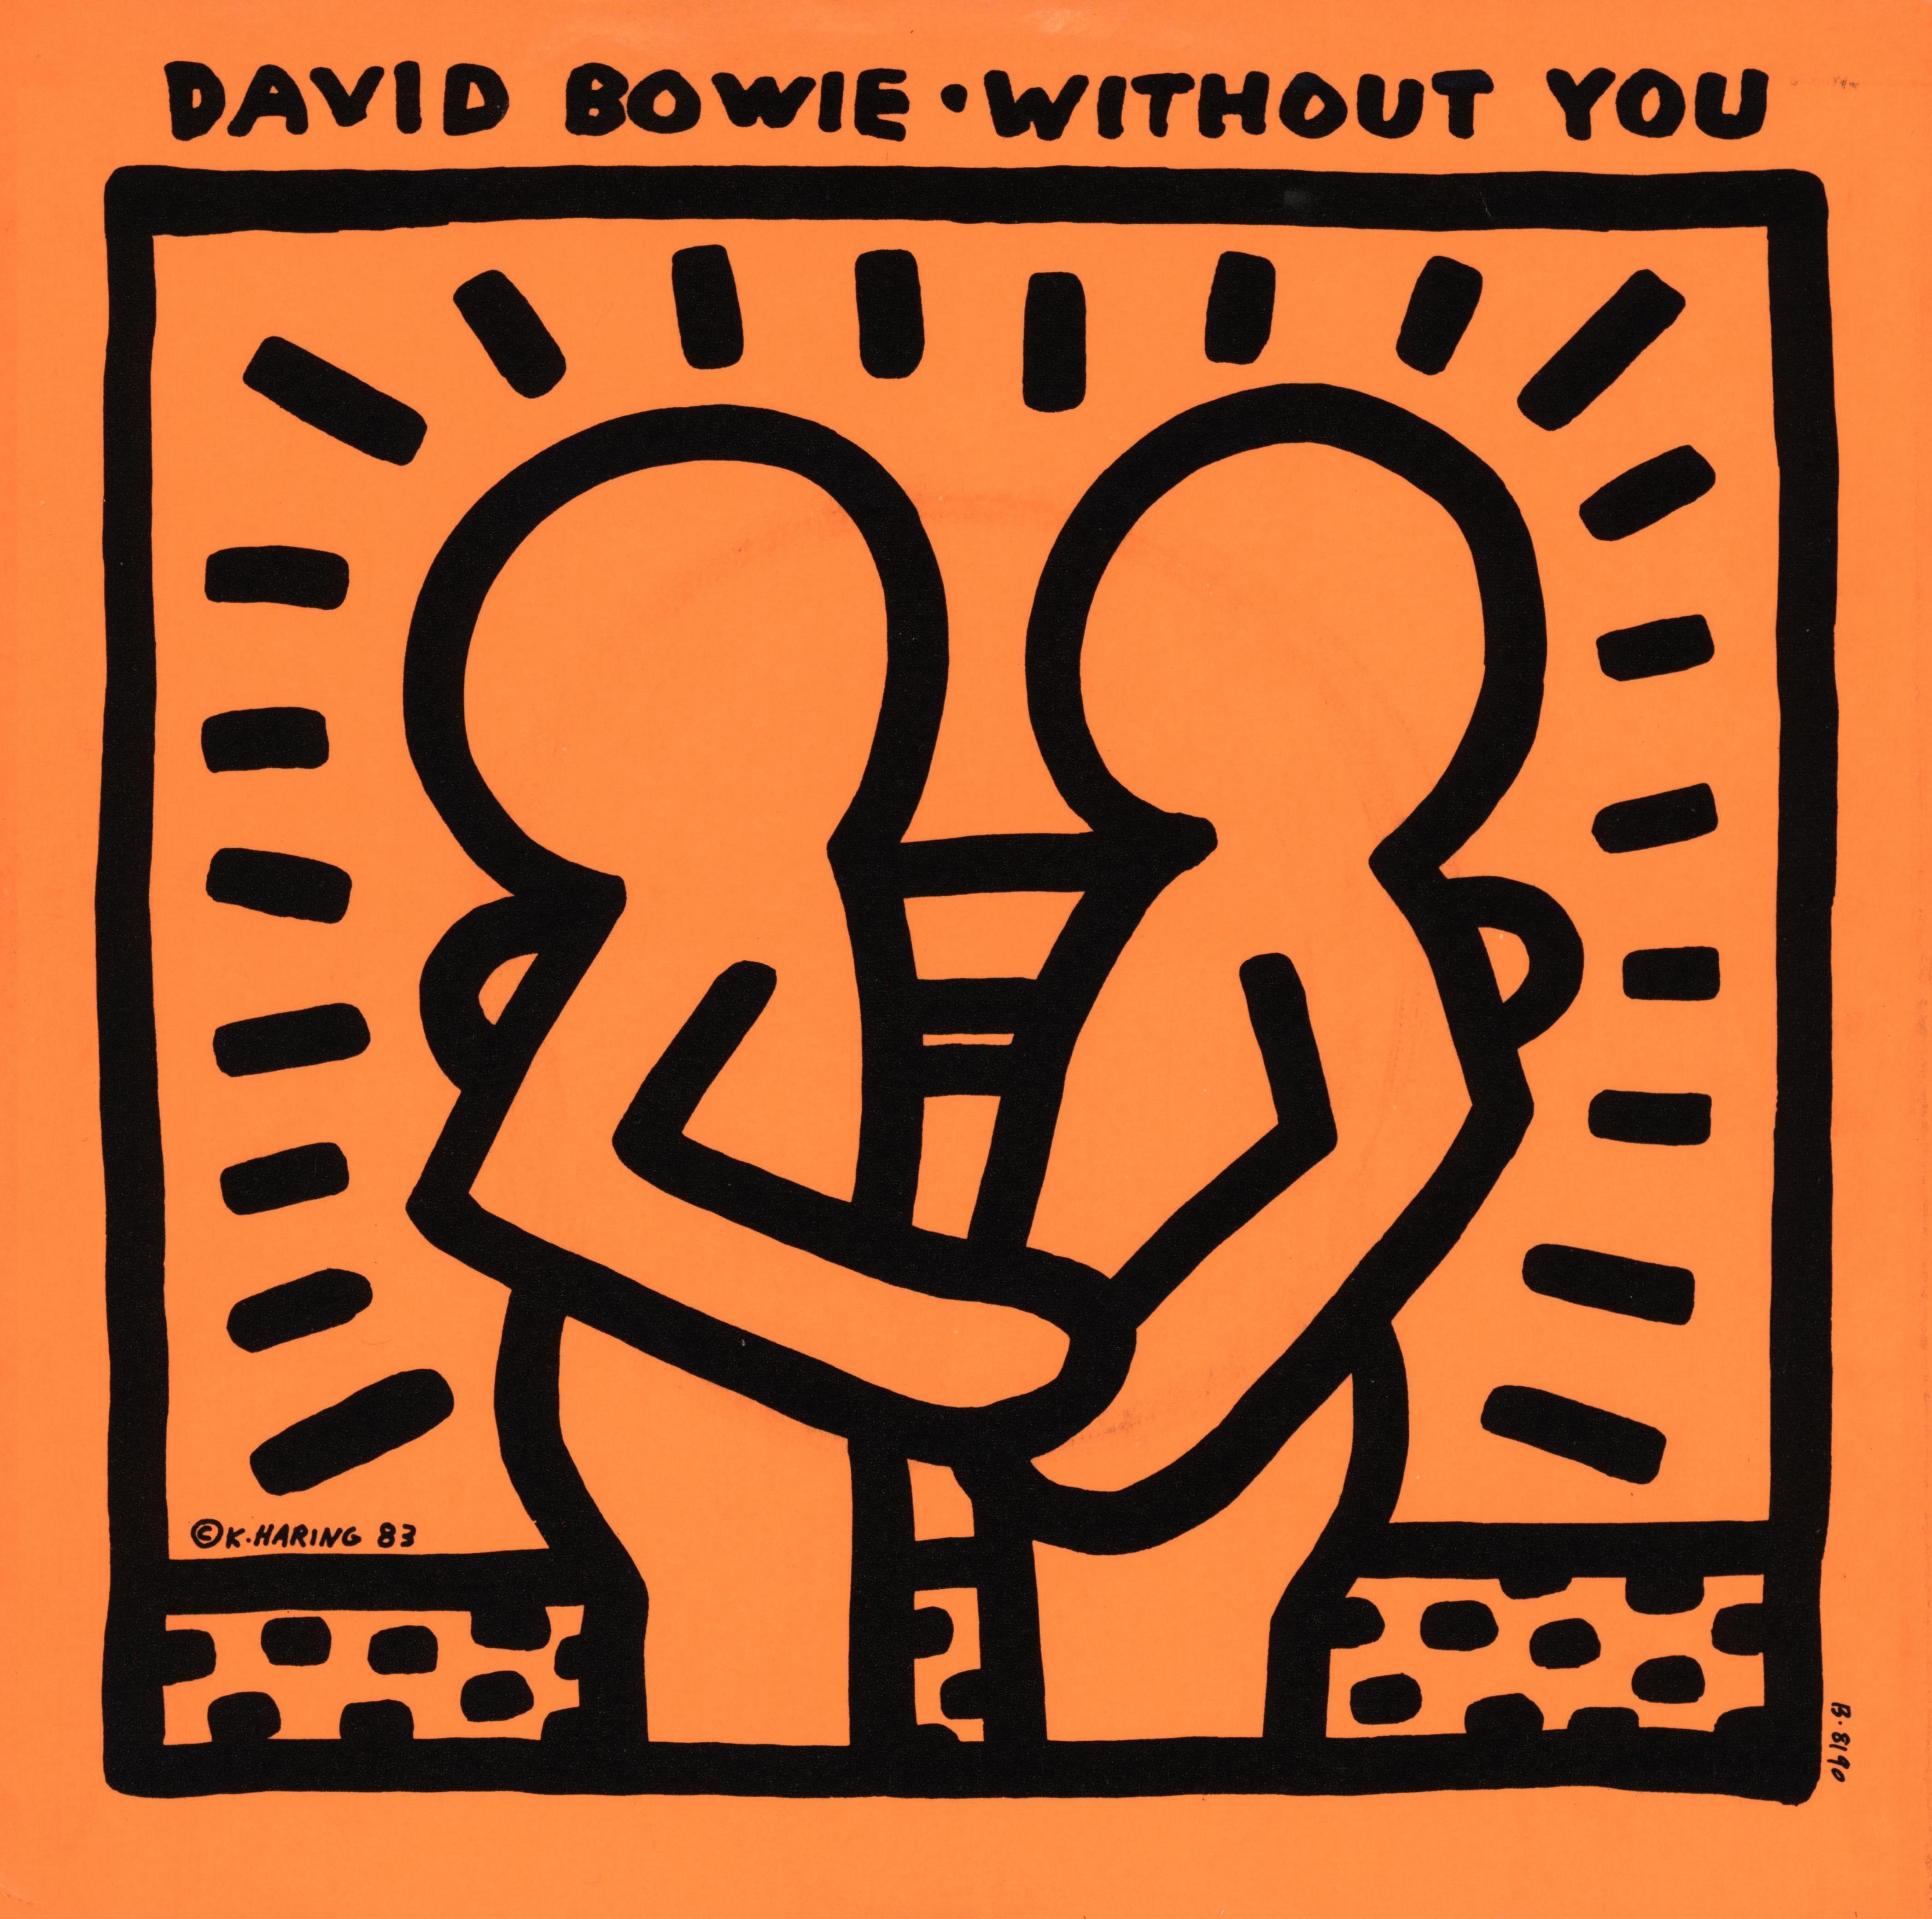 1980s Keith Haring Record Art:
David BOWIE "Without You" A Rare Highly Sought After Vinyl Art Cover featuring original cover artwork by Keith Haring.

Year: 1983.

Medium: Off-Set Lithograph.

Dimensions: 7 x 7 inches.

Cover: Very good overall